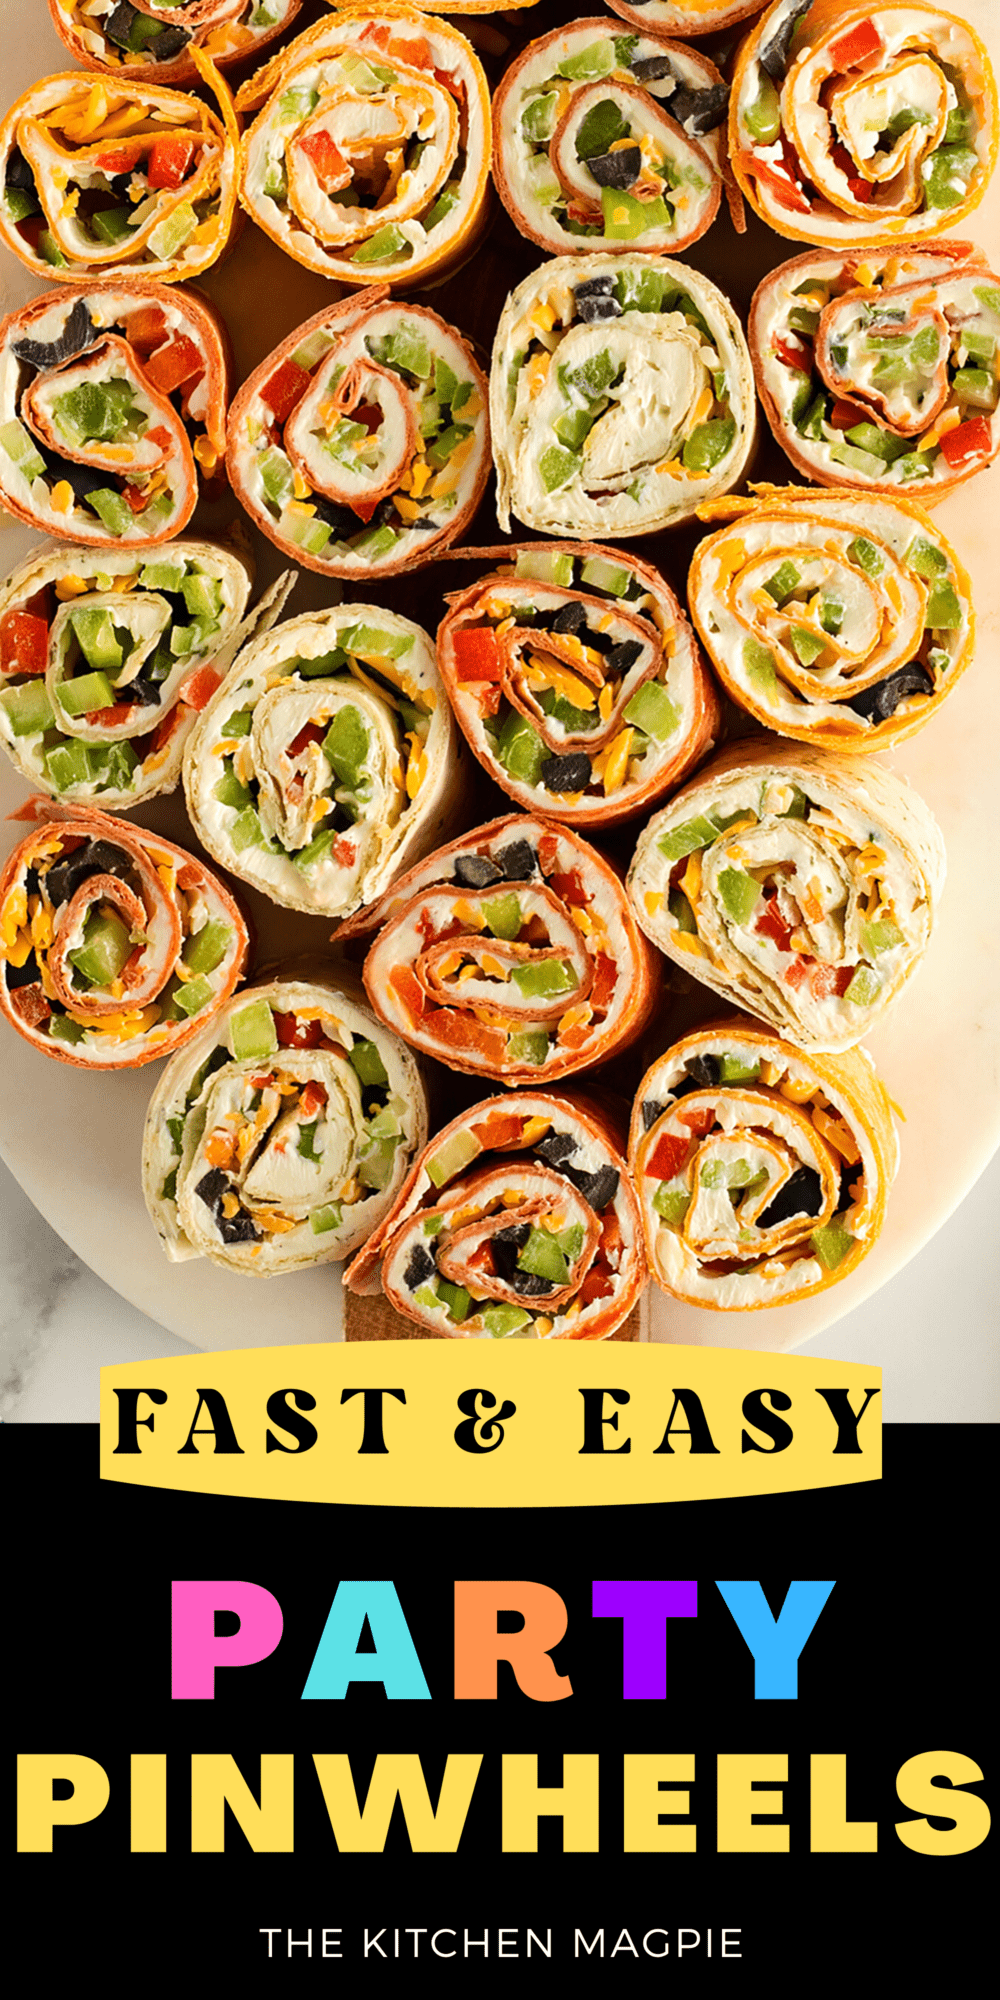 Party pinwheels are filled with a cream cheese mixture and your favorite veggies all rolled up in a tortilla ready to serve as a light snack at your next party!